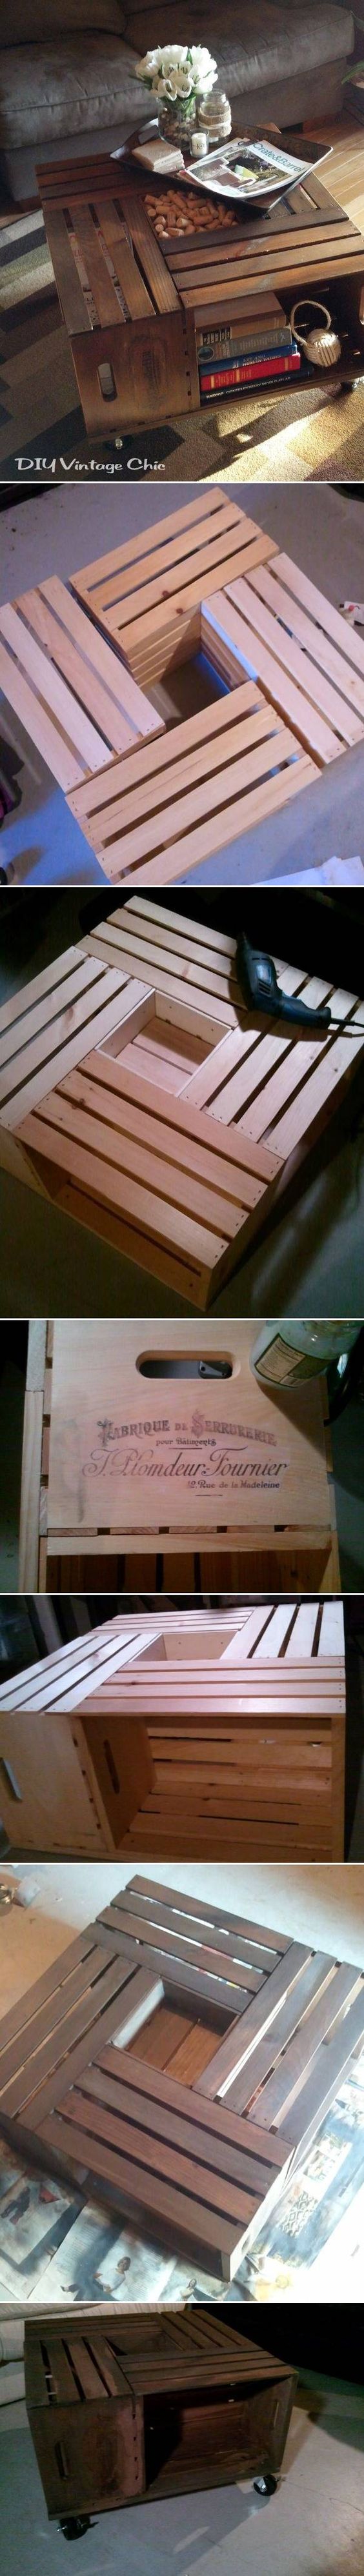 epic wooden boxes diy coffee table design